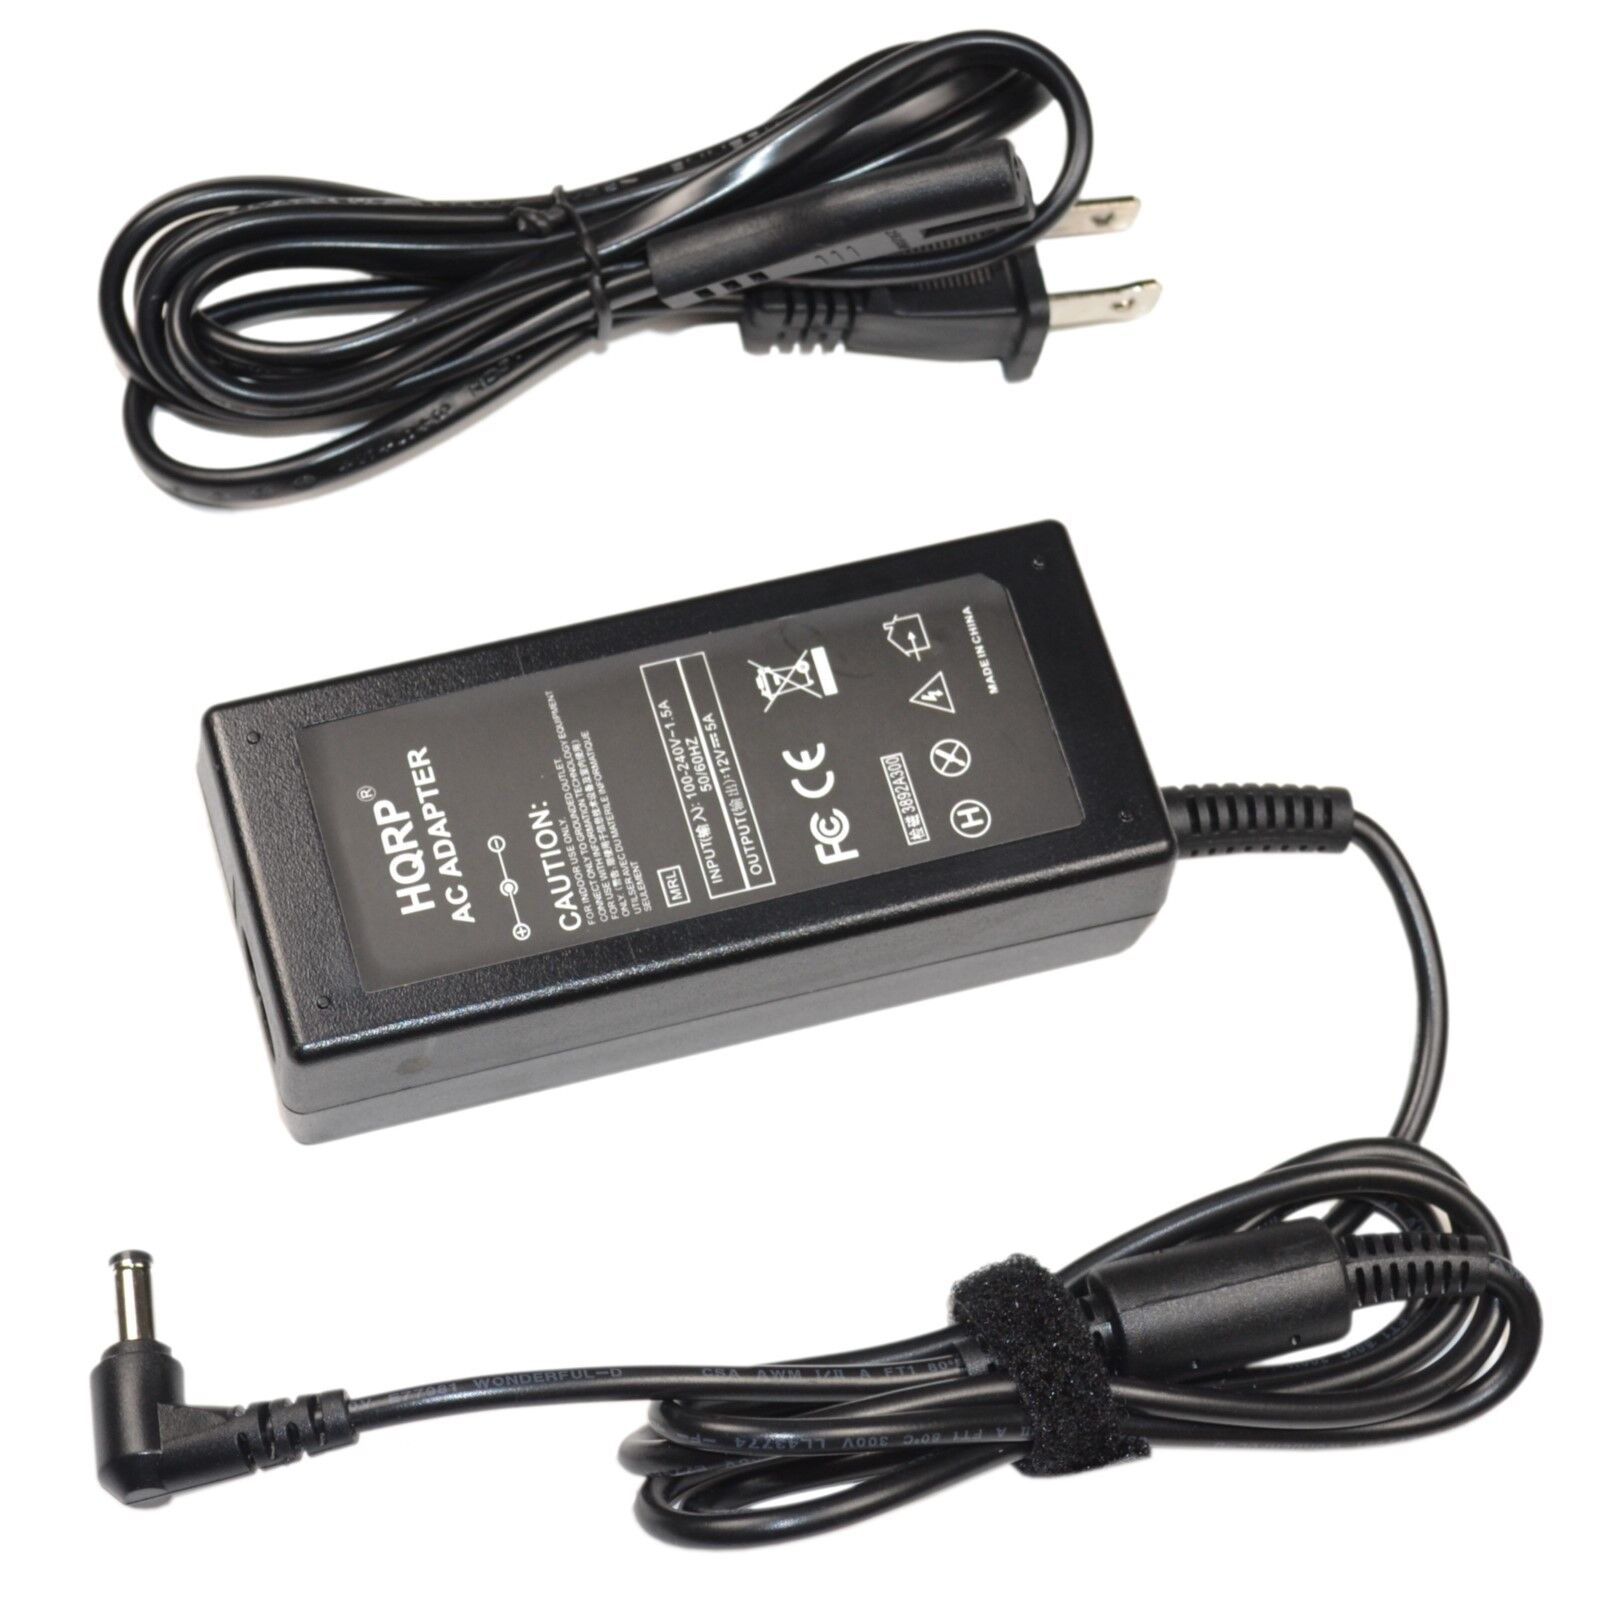 HQRP AC Power Adapter for Maxtor OneTouch IV HDD 500GB / 750GB / 1TB